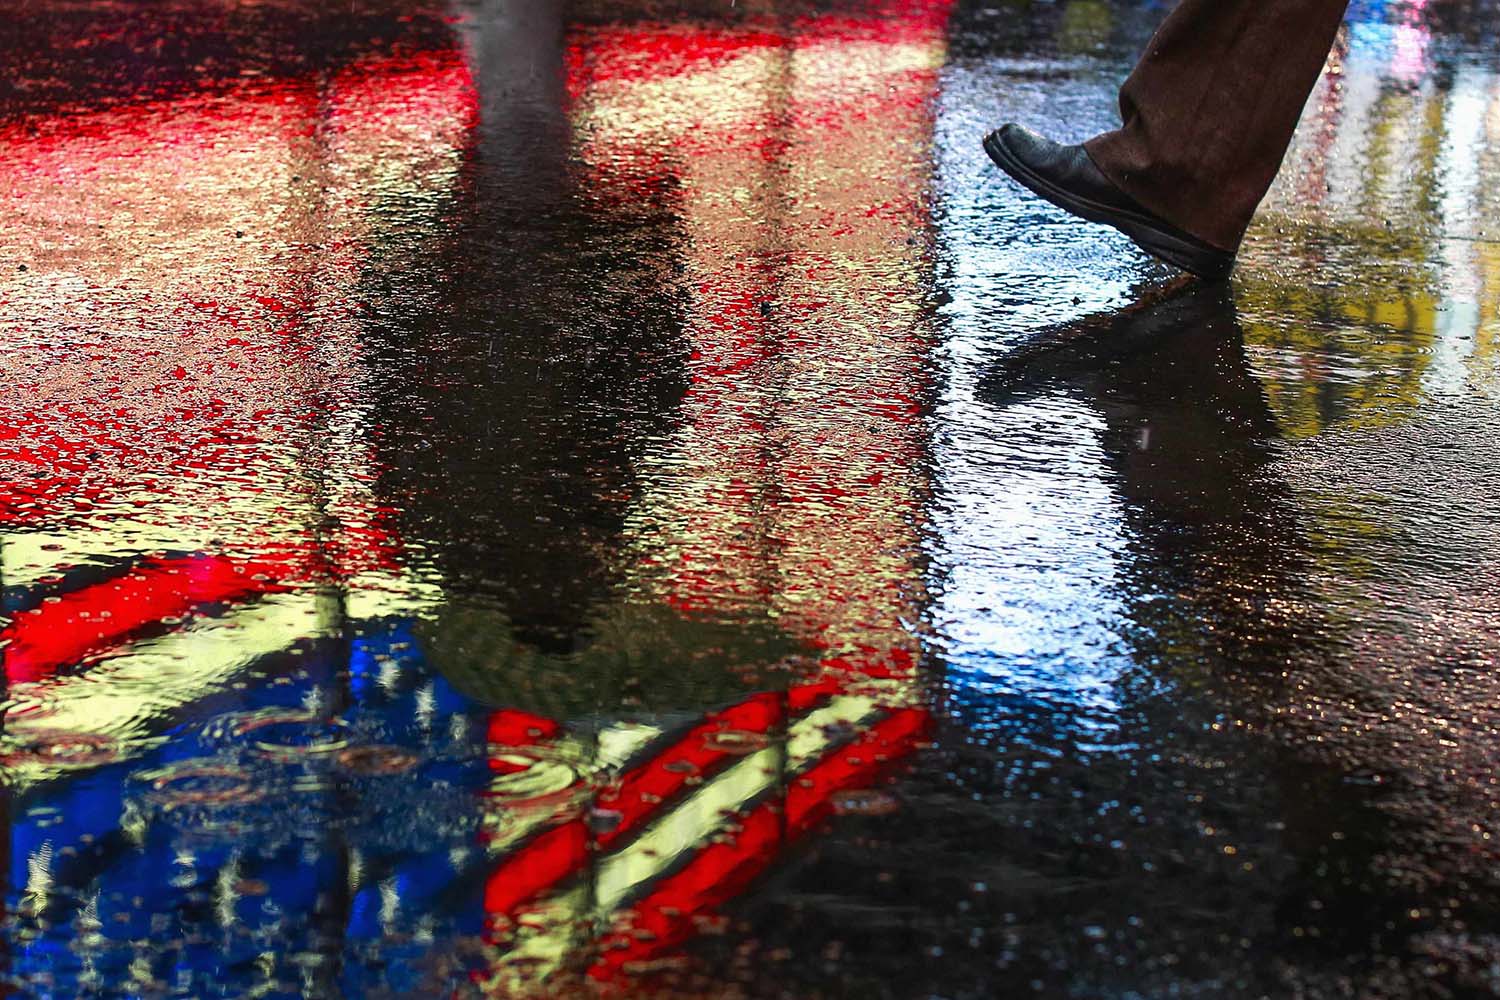 People walk through puddles during a morning snow mixed with rain shower at Times Square located in the Manhattan borough of New York